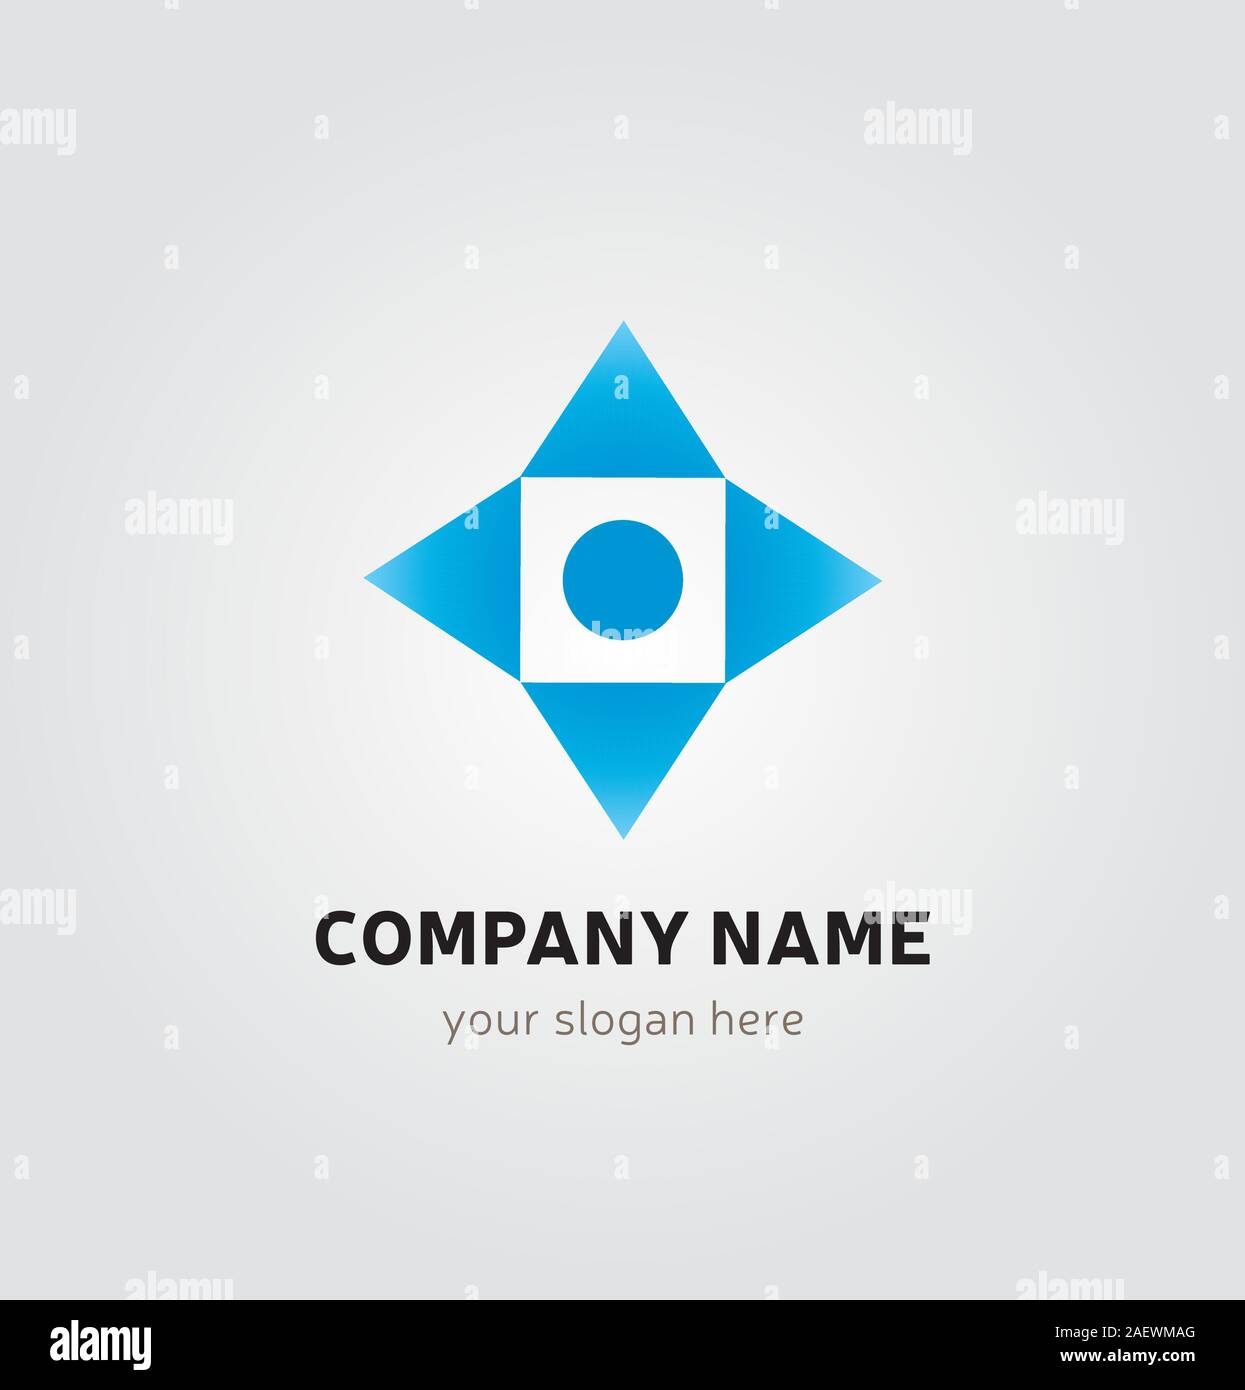 Single Logo Design - Square, Arrows and Dot Elements  Blue Colors Stock Vector